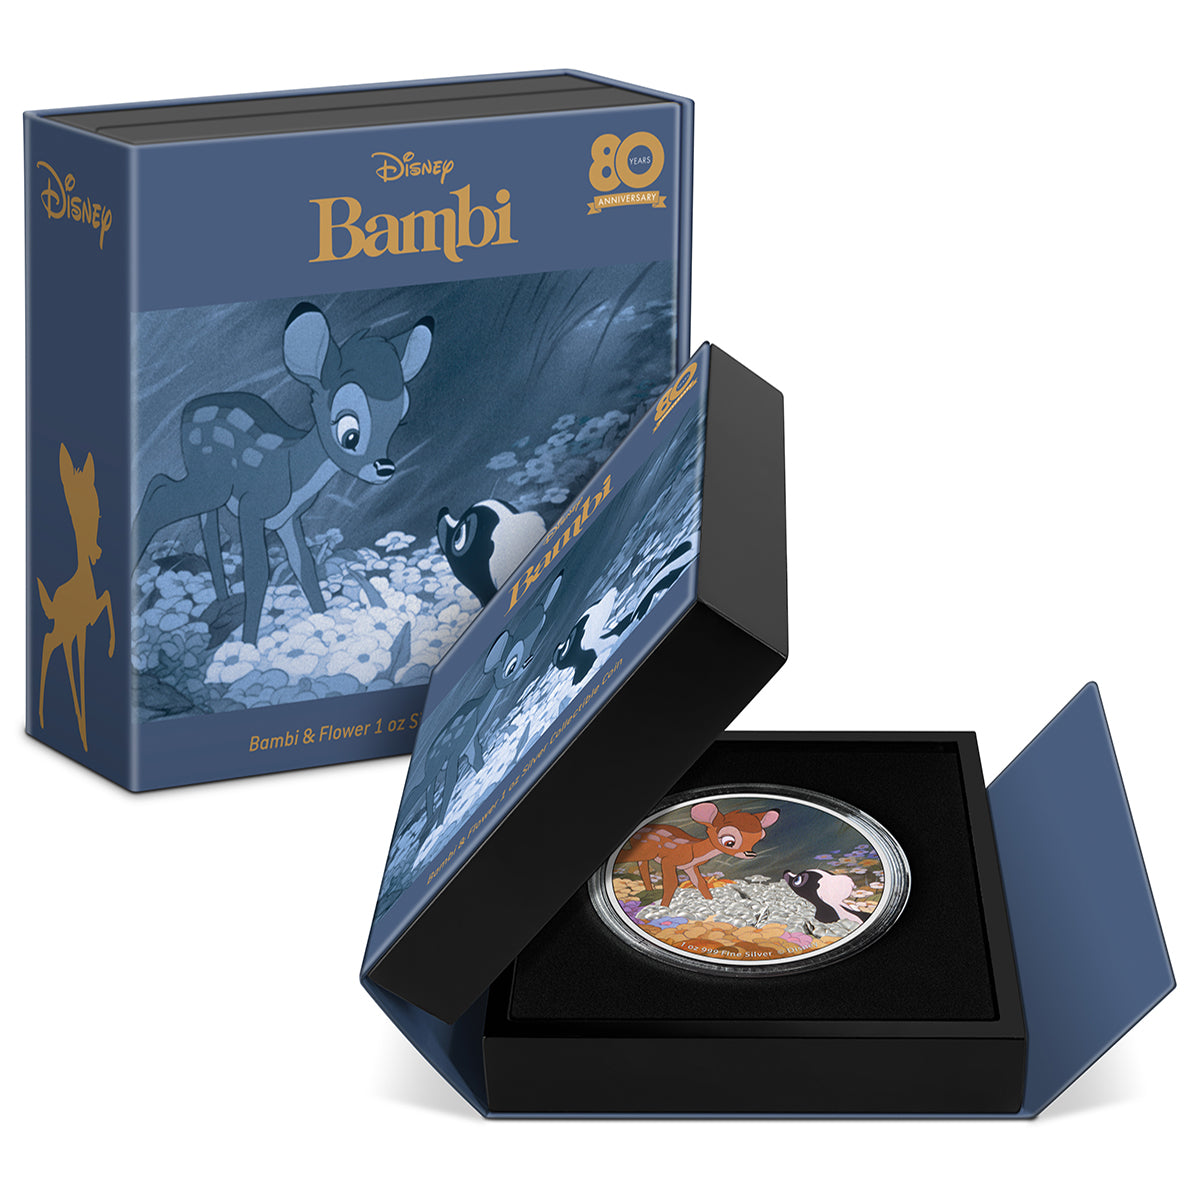 Disney Bambi 80th Anniversary Bambi and Flower 1 oz Silver Coin